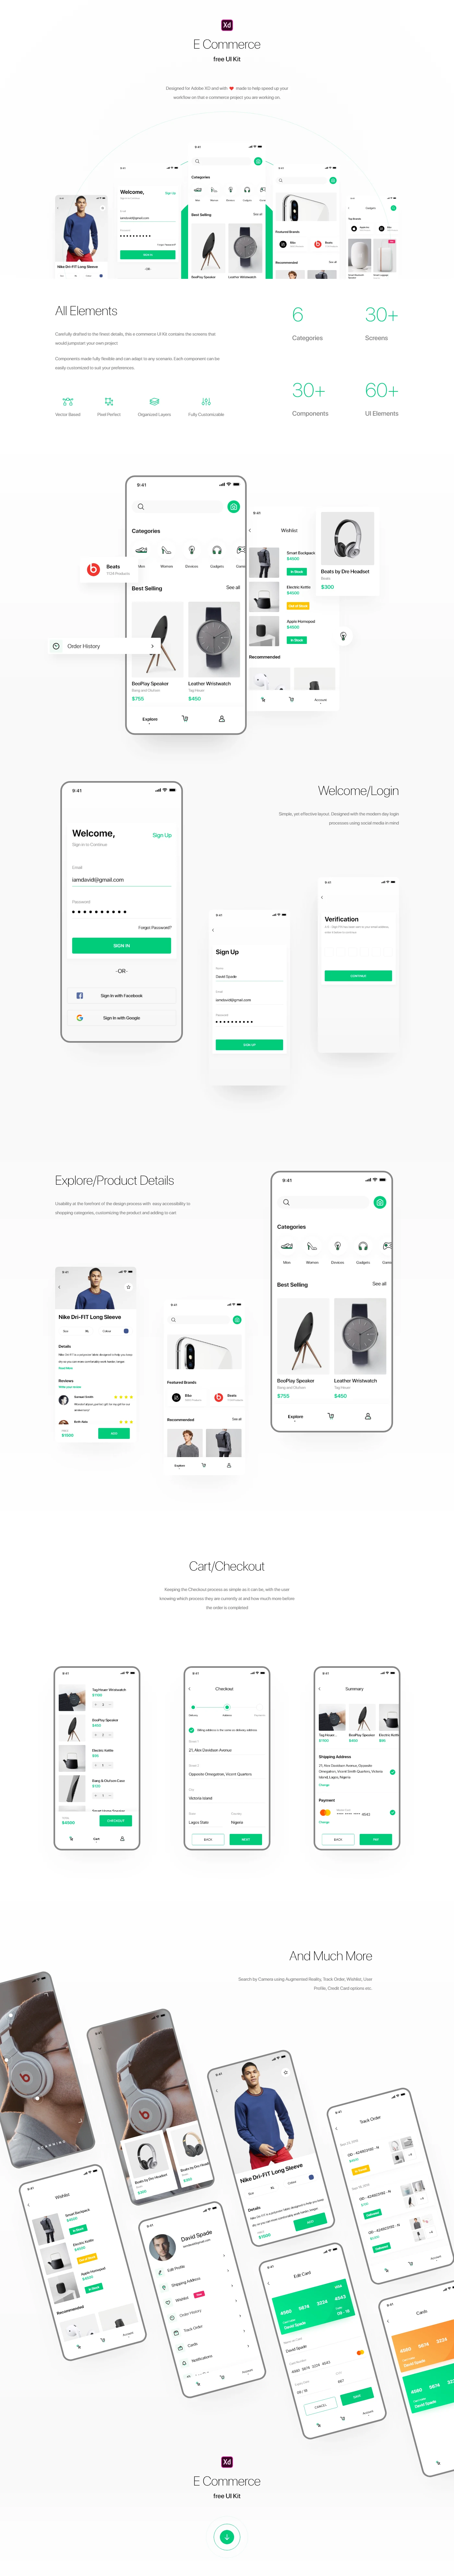 Shopping UI Kit for Adobe XD - Minimal and clean shopping app design, 30+ screens for you to get started. Each element is fully vector based, with pixel-perfect construction, well organized in layers, and made fully flexible so that it can be adapted to any projects.